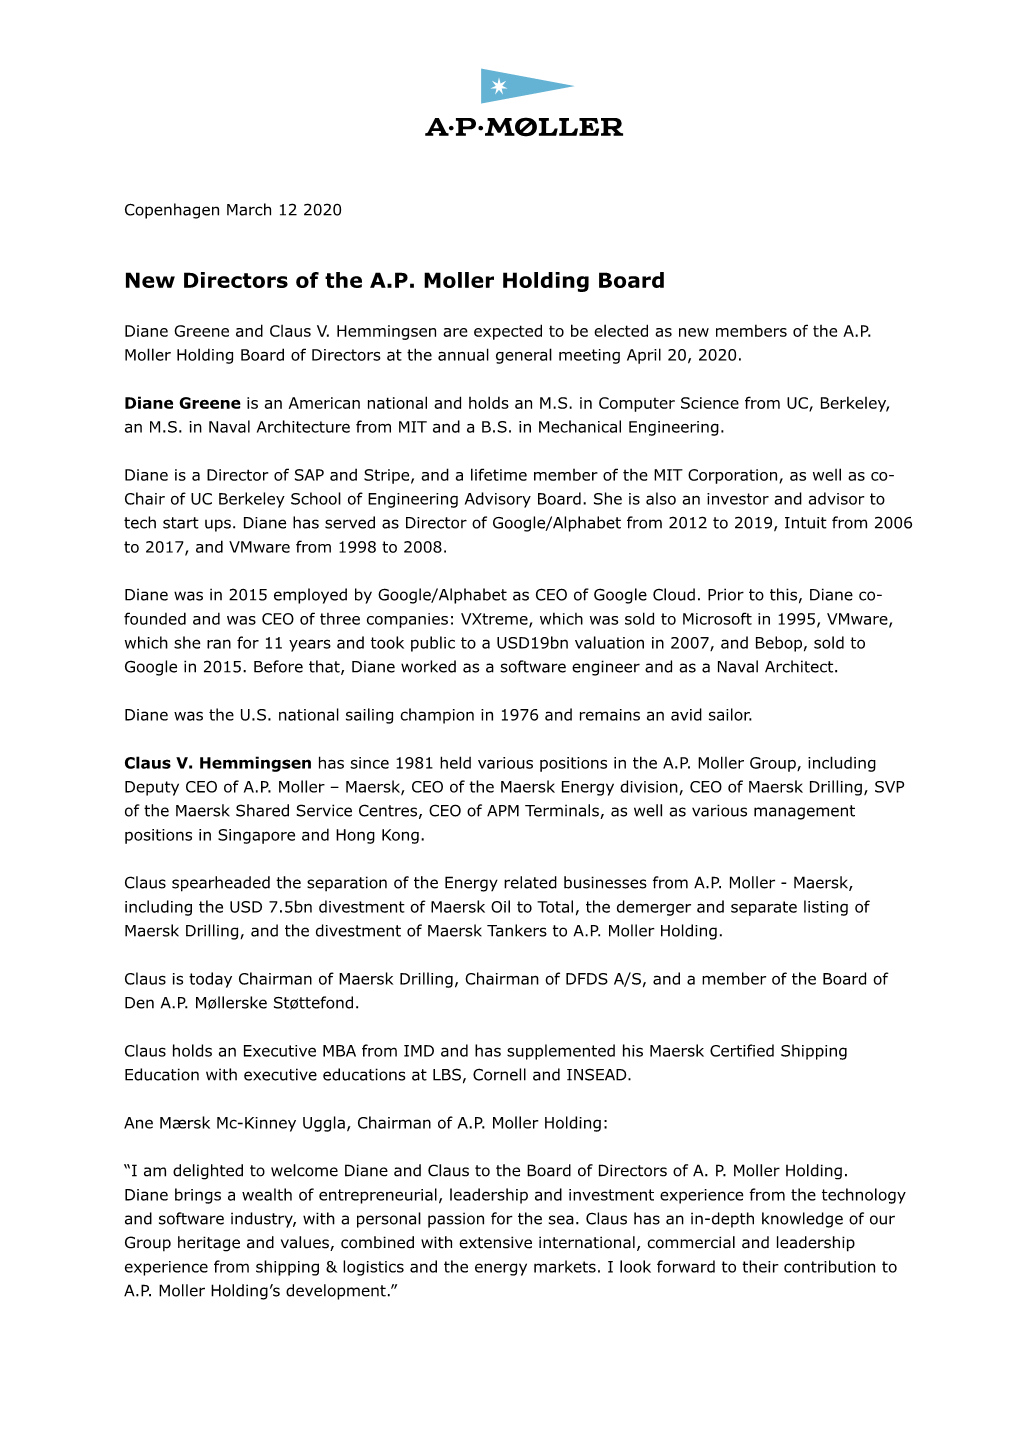 New Directors of the A.P. Moller Holding Board